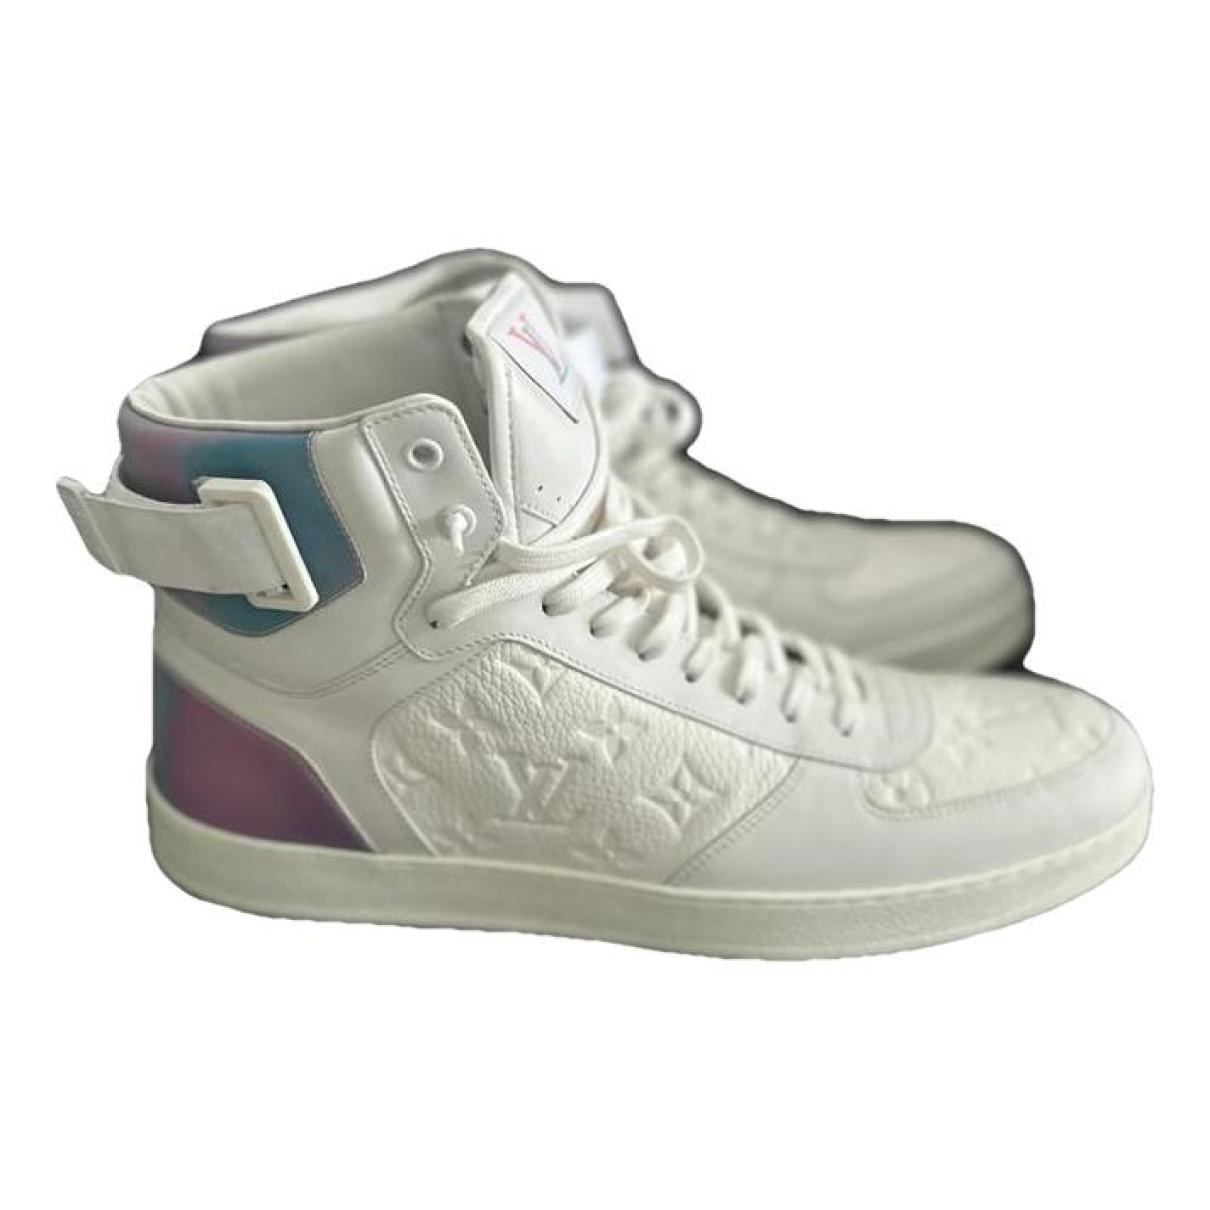 Lv trainer leather high trainers Louis Vuitton White size 9.5 UK in Leather  - 32028949